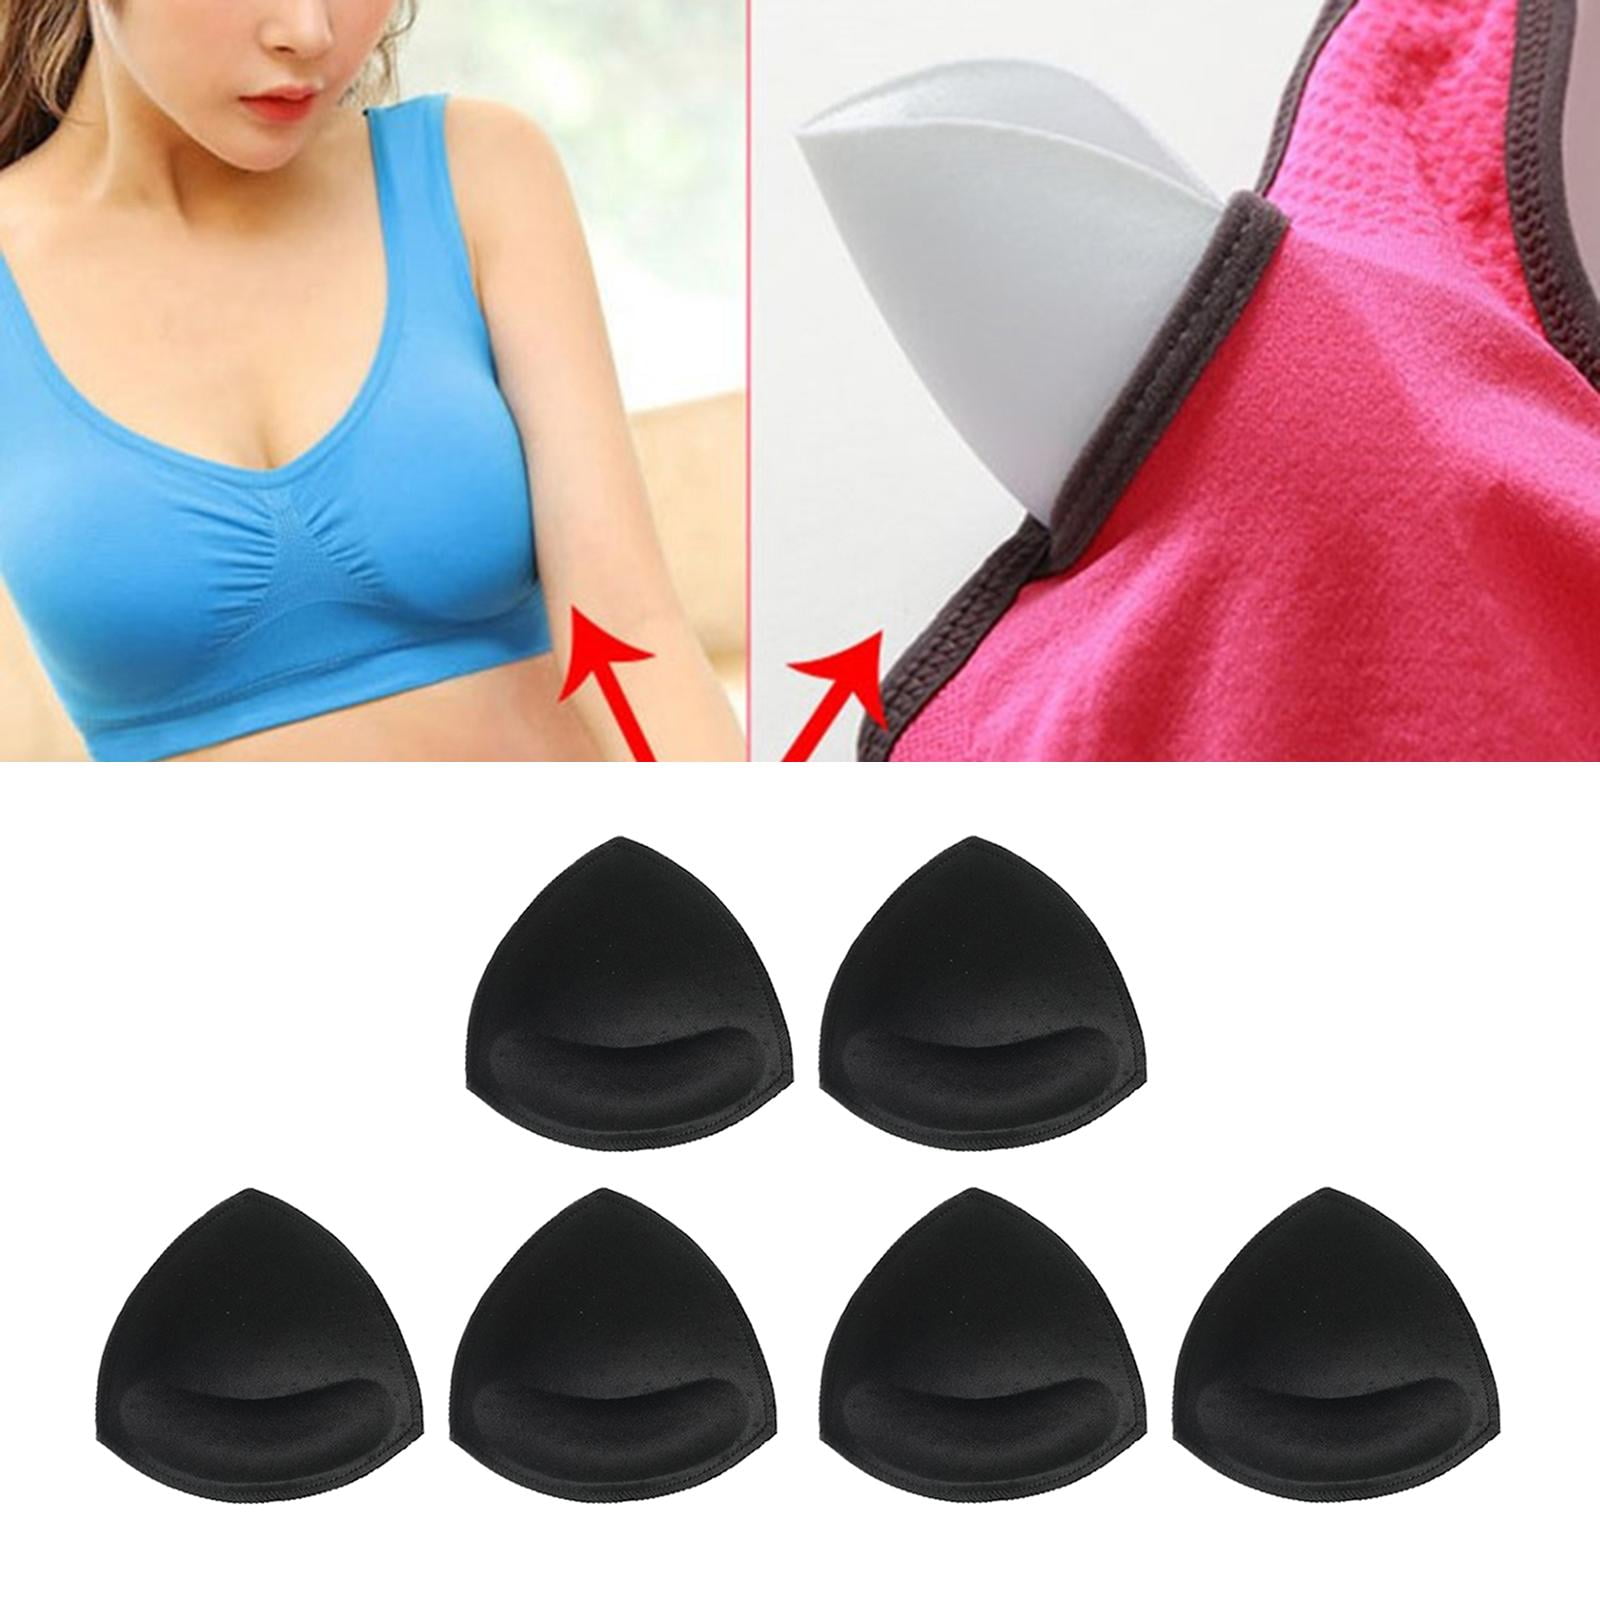 Bra Inserts Pads Removable 3 Pairs Bra Cups Inserts Replacement